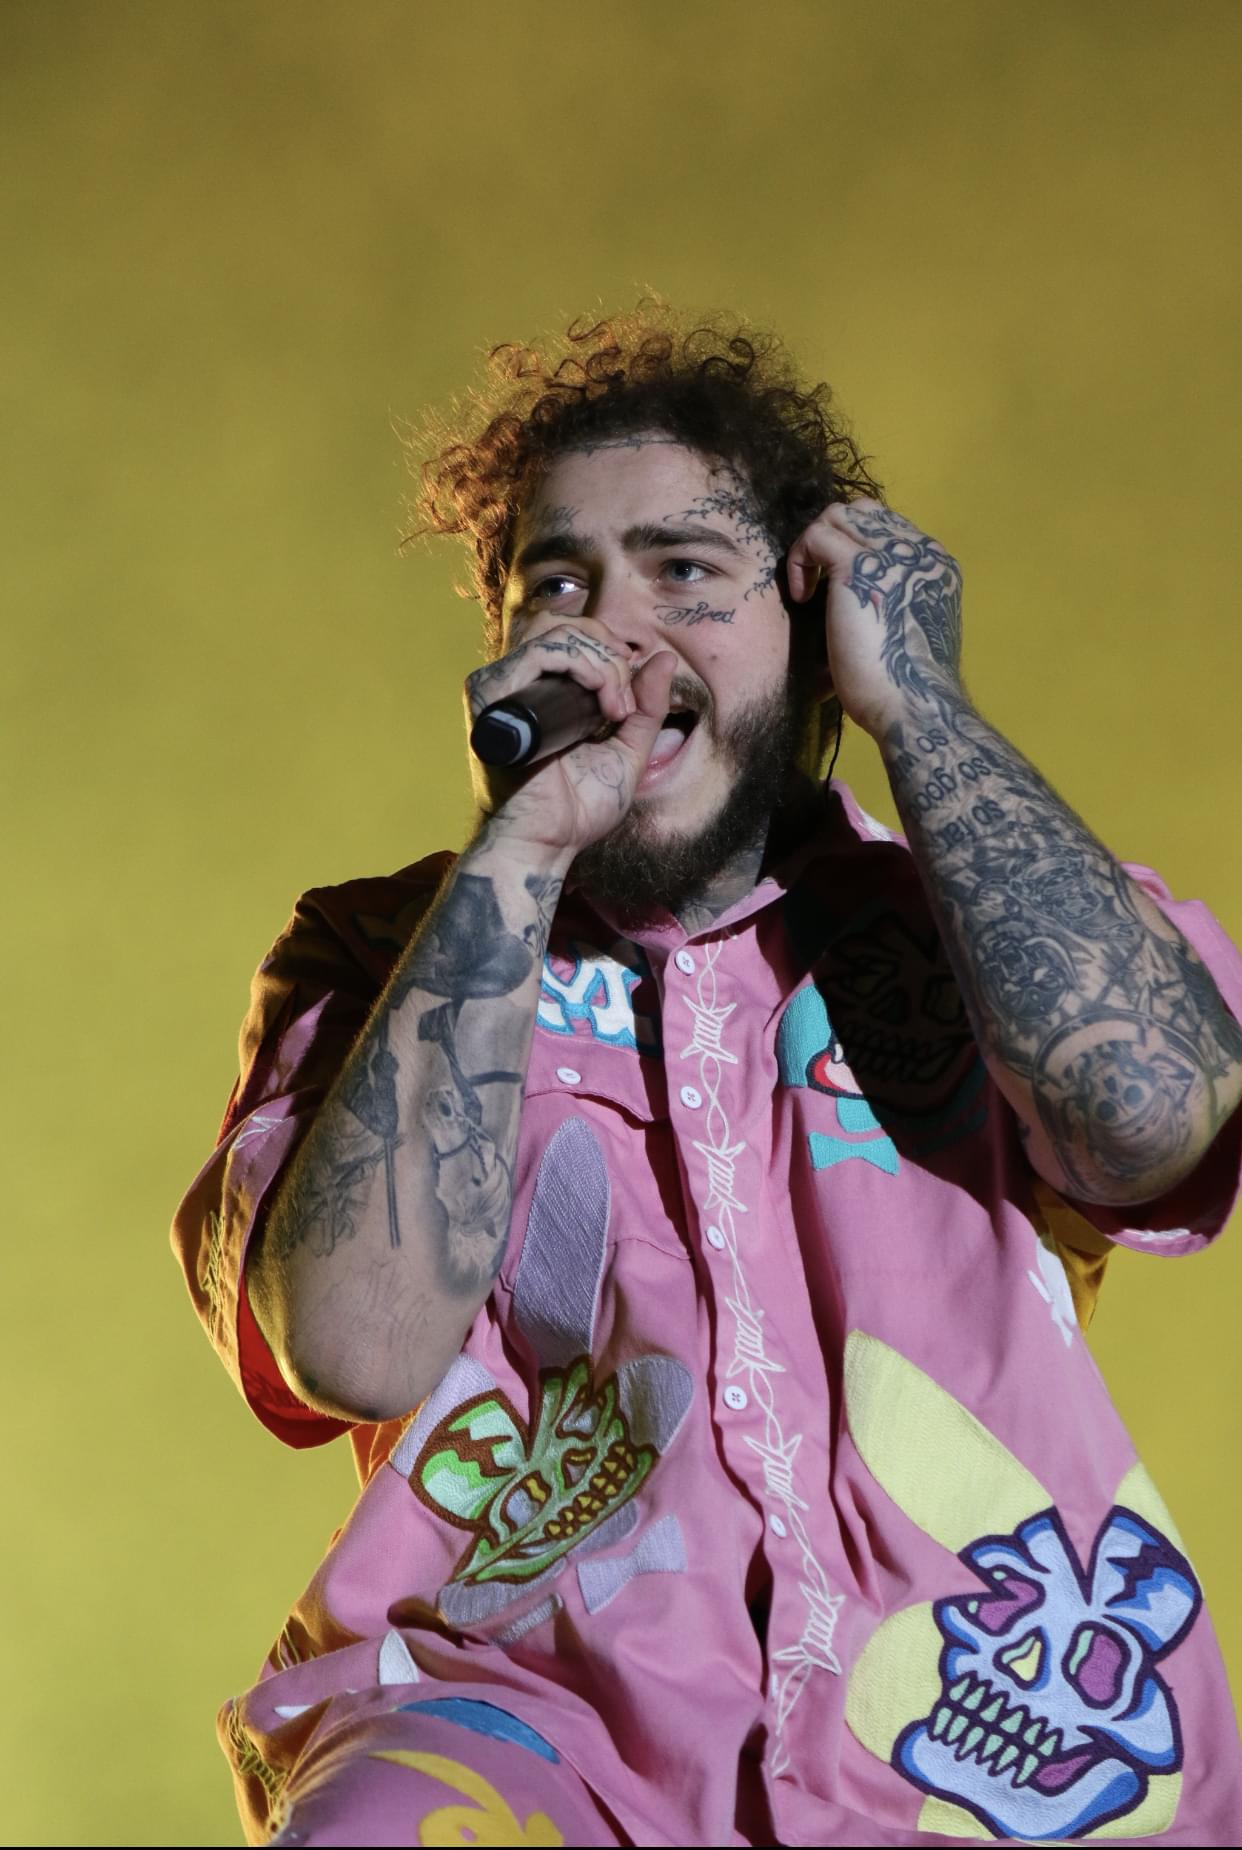 Post Malone Teases New Single “Circles” [LISTEN]